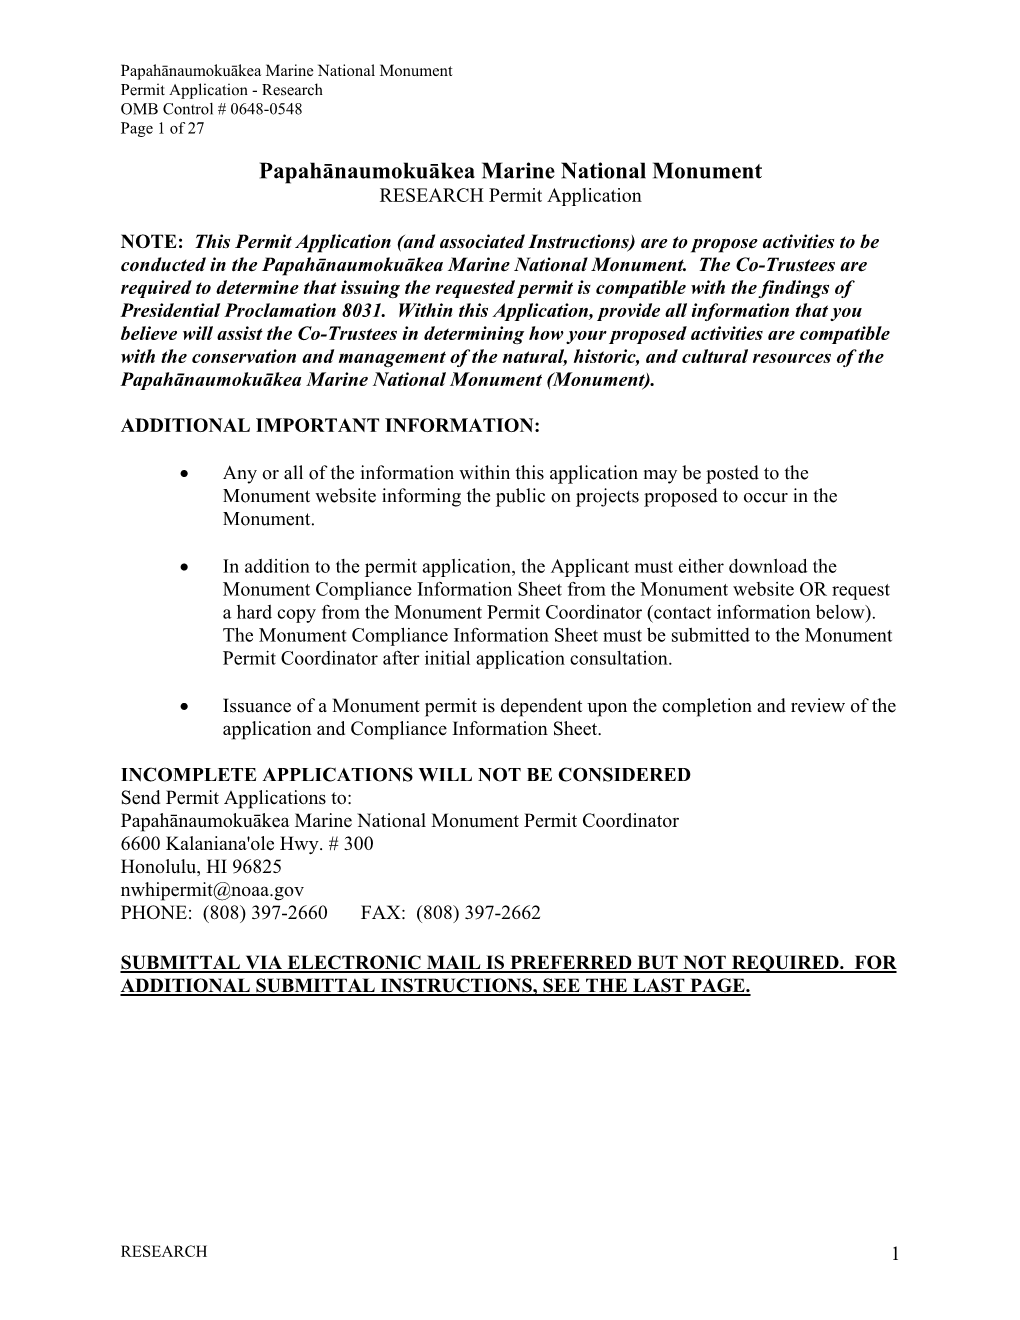 Papahānaumokuākea Marine National Monument Permit Application - Research OMB Control # 0648-0548 Page 1 of 27